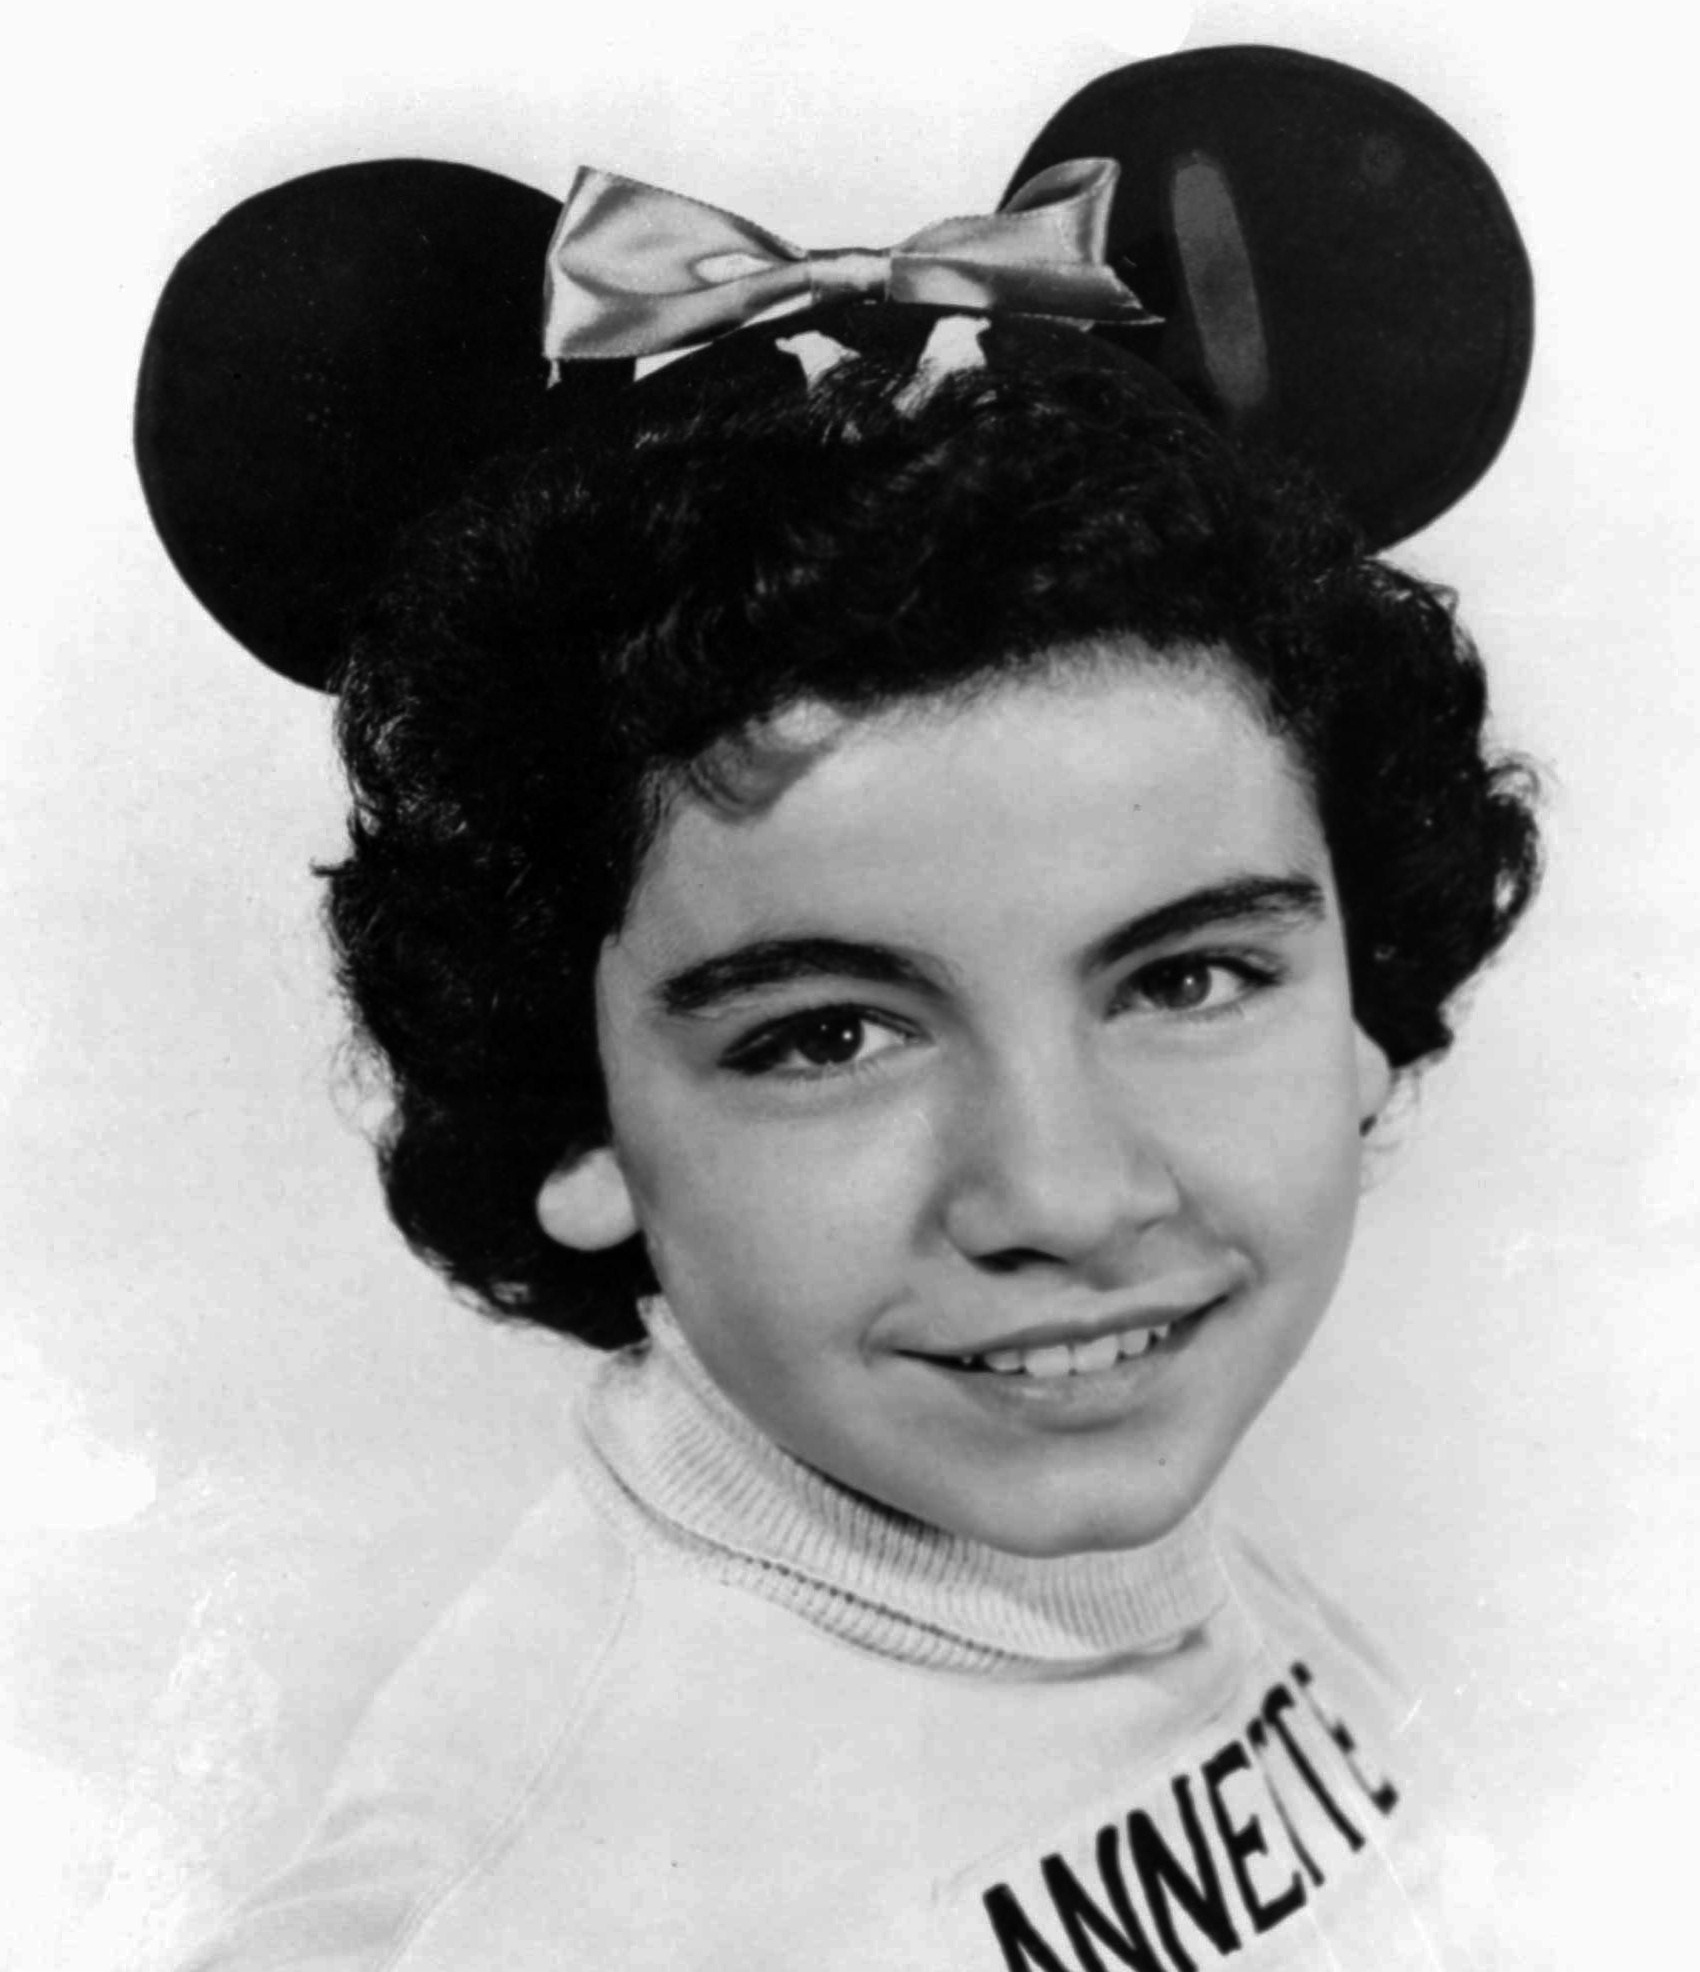 Annette Funicello, a &quot;Mouseketeer&quot; on Walt Disney's TV series the &quot;Mickey Mouse Club&quot; in the 1950s, died Monday at age 70.